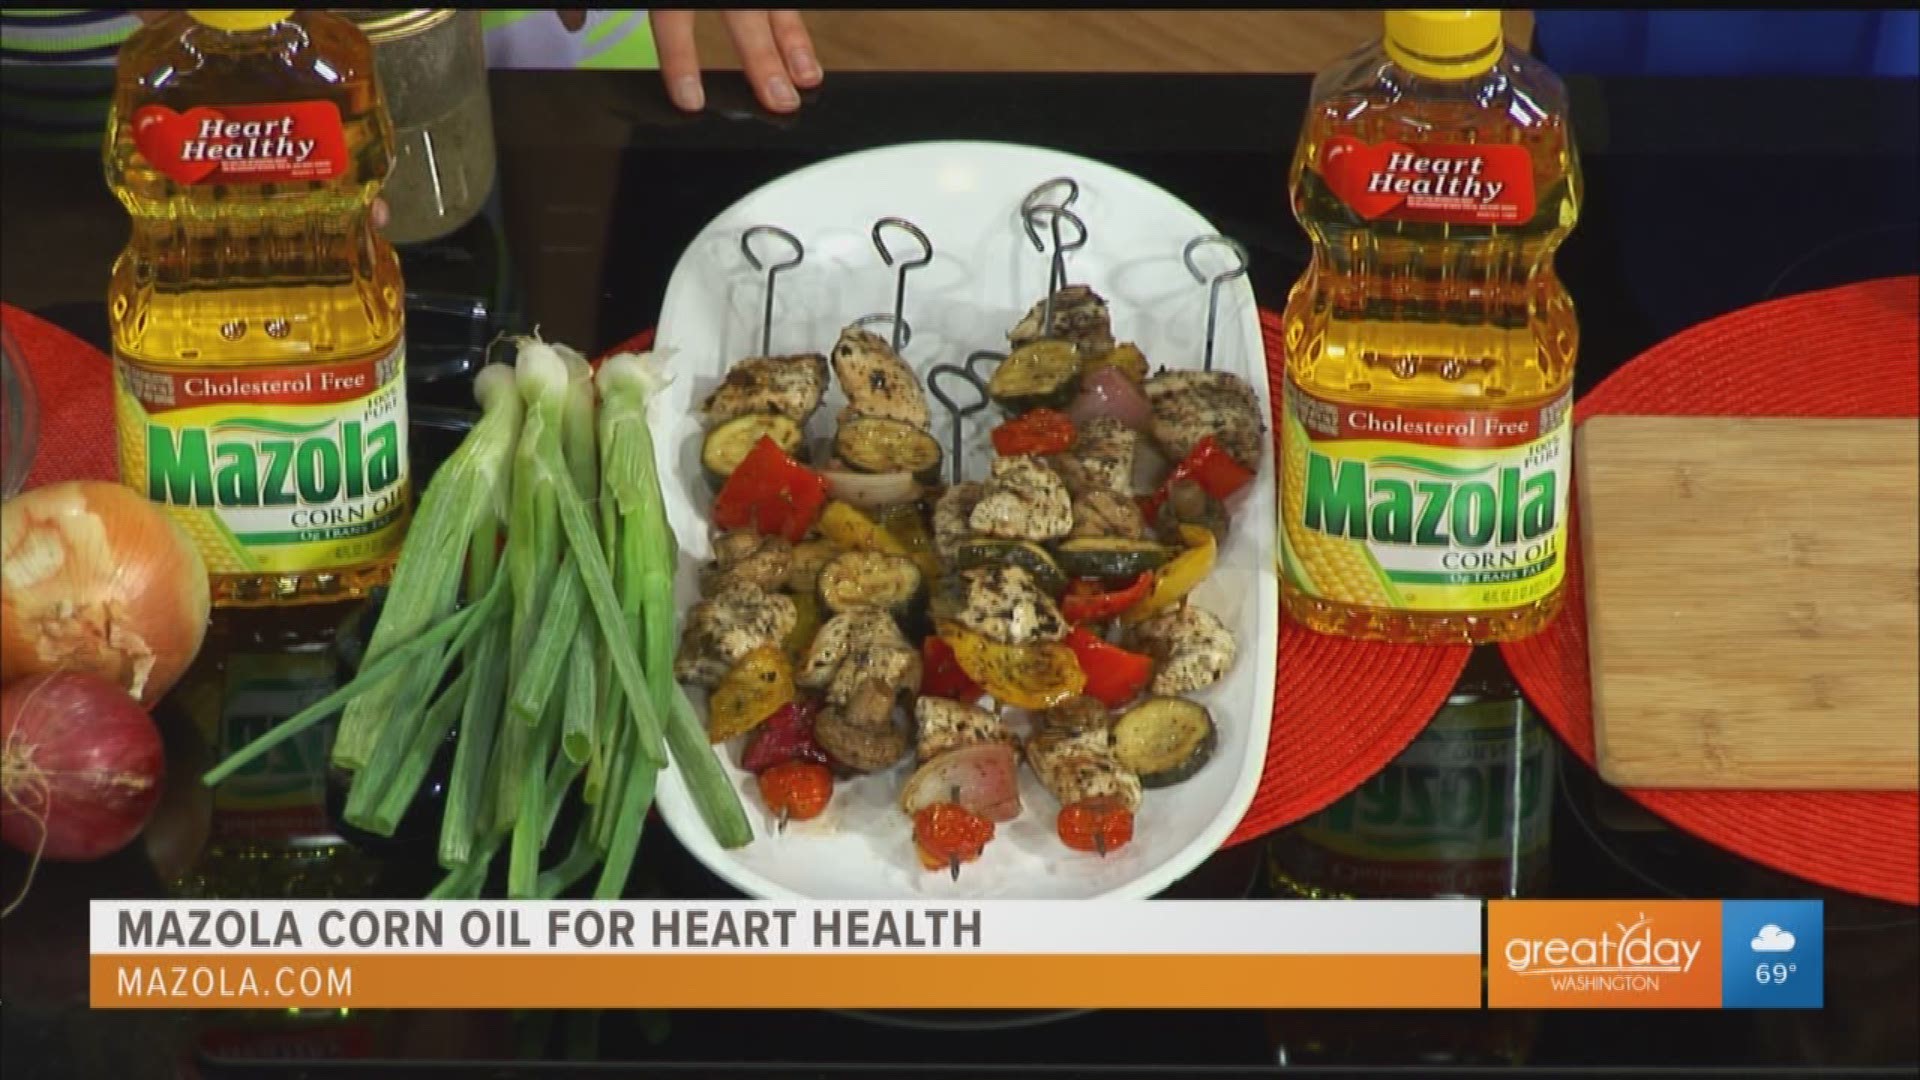 The following segment is sponsored by Mazola. Registered Dietitian and author of Body Kindness, Rebecca Scritchfield shares the many healthy benefits of Mazola corn oil. For recipes and more go to Mazola.com.